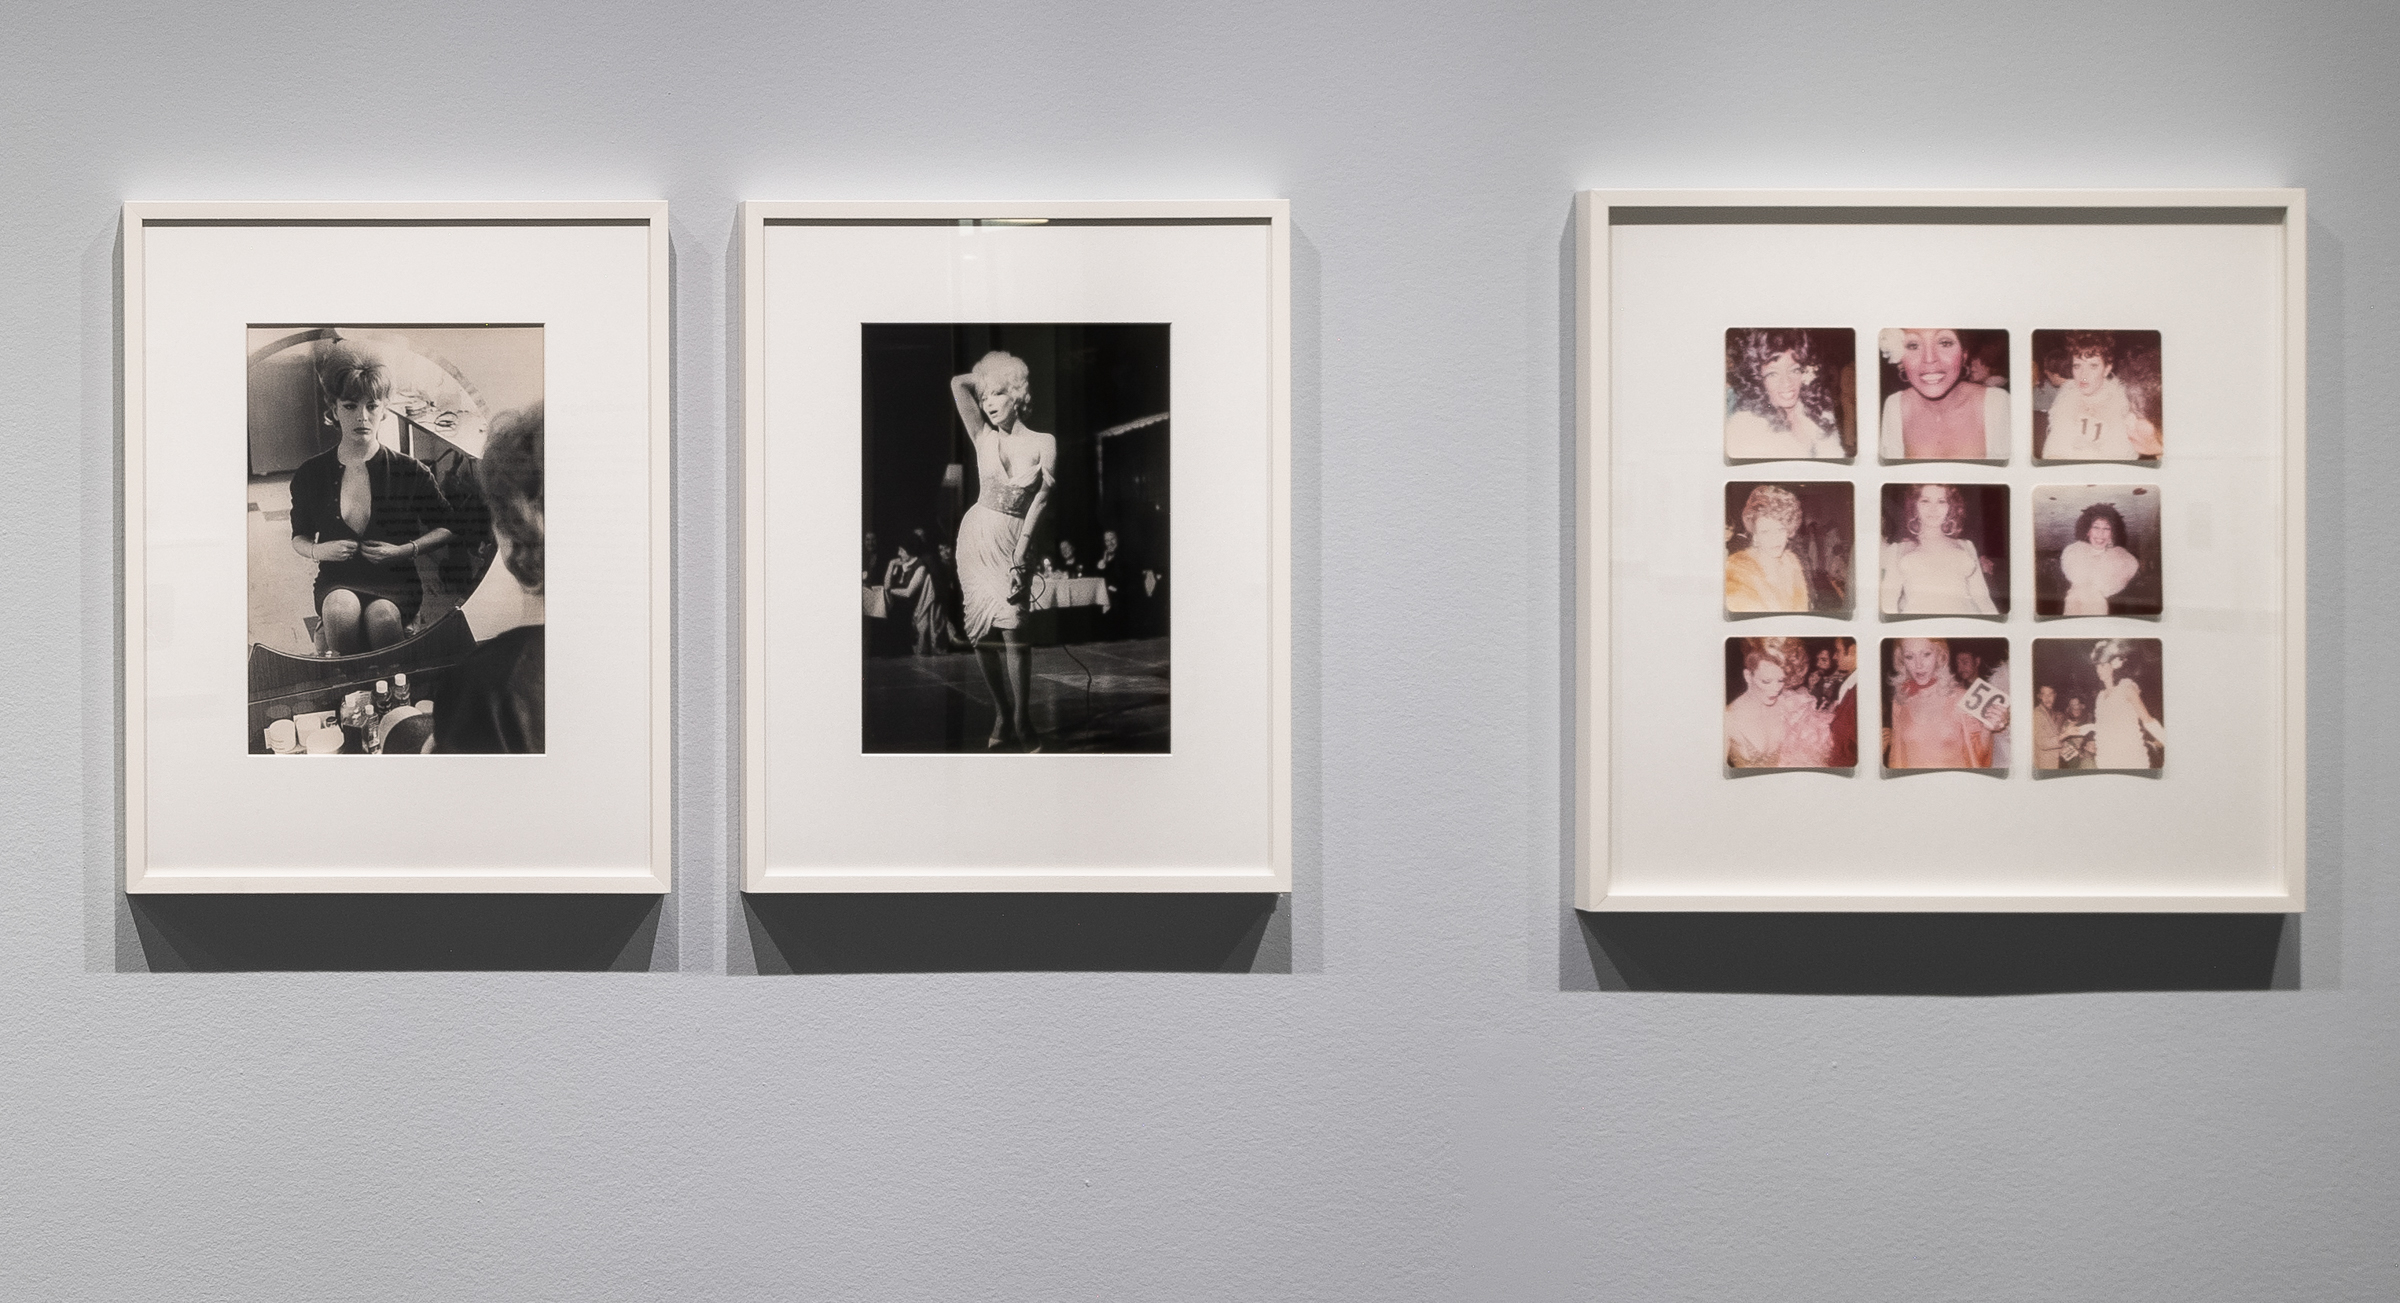     Various photographers, Mauvais Genre/Under Cover: A Secret History of Cross-Dressers, installation view, Ryerson Image Centre Gallery, 2022. Courtesy of Sébastien Lifshitz and the RIC

